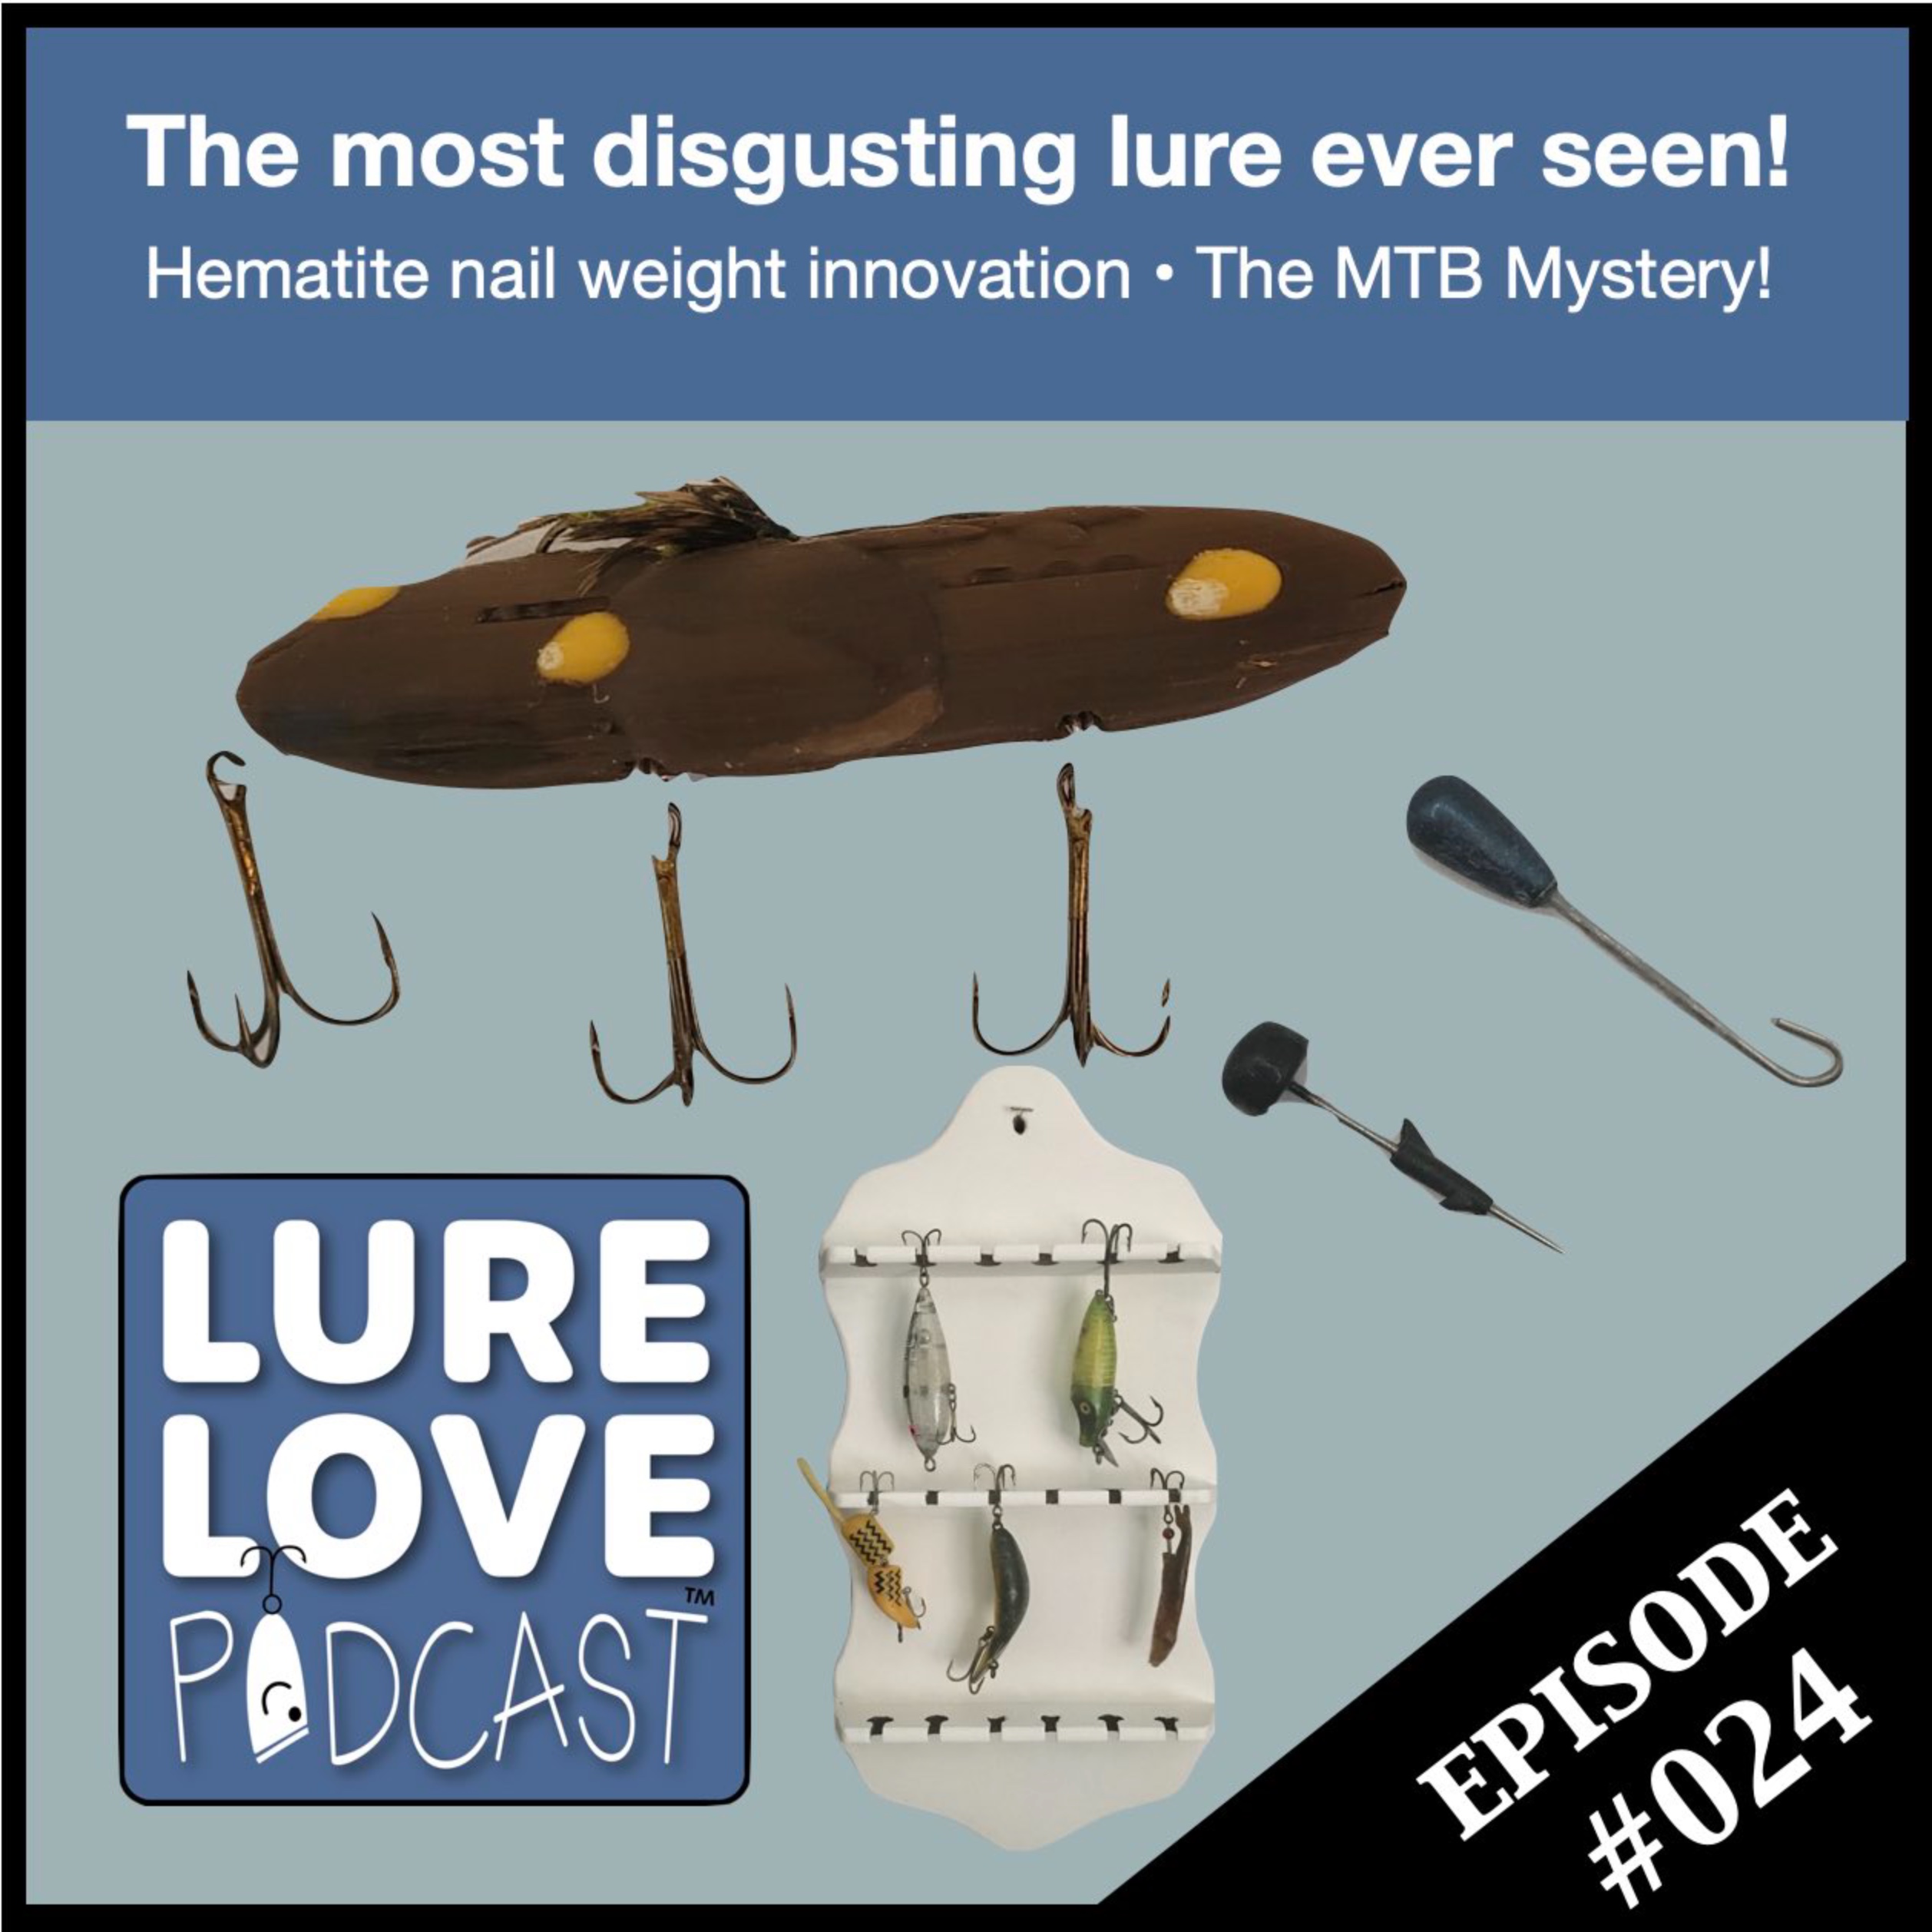 The most disgusting lure ever seen!